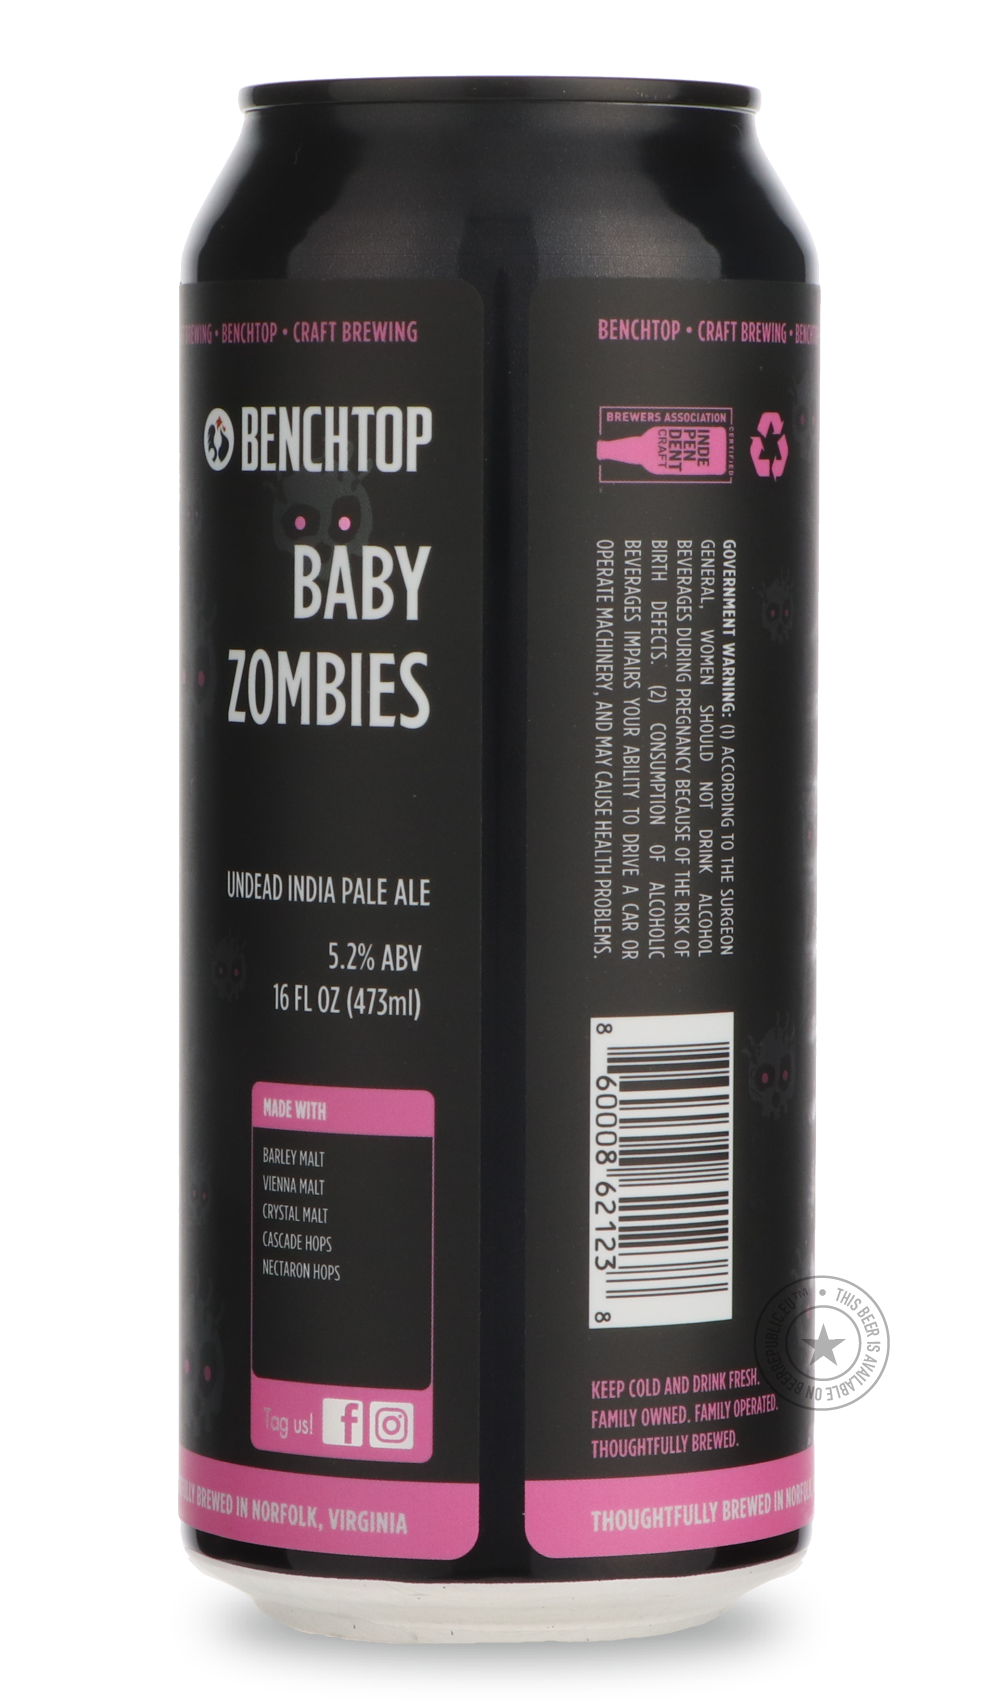 -Benchtop- Baby Zombies-IPA- Only @ Beer Republic - The best online beer store for American & Canadian craft beer - Buy beer online from the USA and Canada - Bier online kopen - Amerikaans bier kopen - Craft beer store - Craft beer kopen - Amerikanisch bier kaufen - Bier online kaufen - Acheter biere online - IPA - Stout - Porter - New England IPA - Hazy IPA - Imperial Stout - Barrel Aged - Barrel Aged Imperial Stout - Brown - Dark beer - Blond - Blonde - Pilsner - Lager - Wheat - Weizen - Amber - Barley Wi